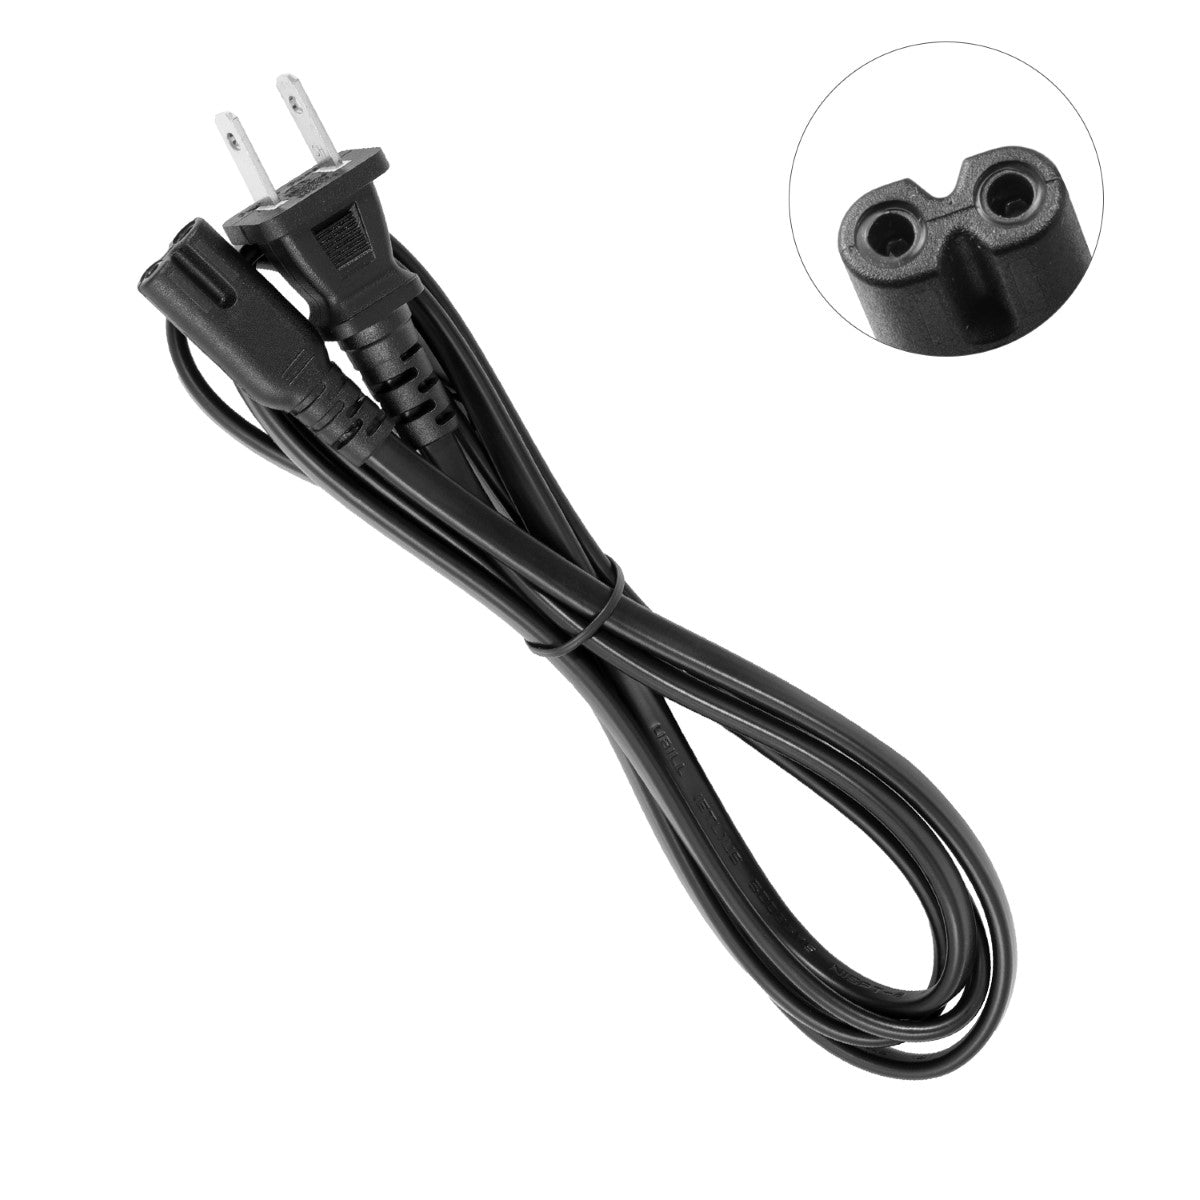 Power Cable for HP OfficeJet 5255 Printer.